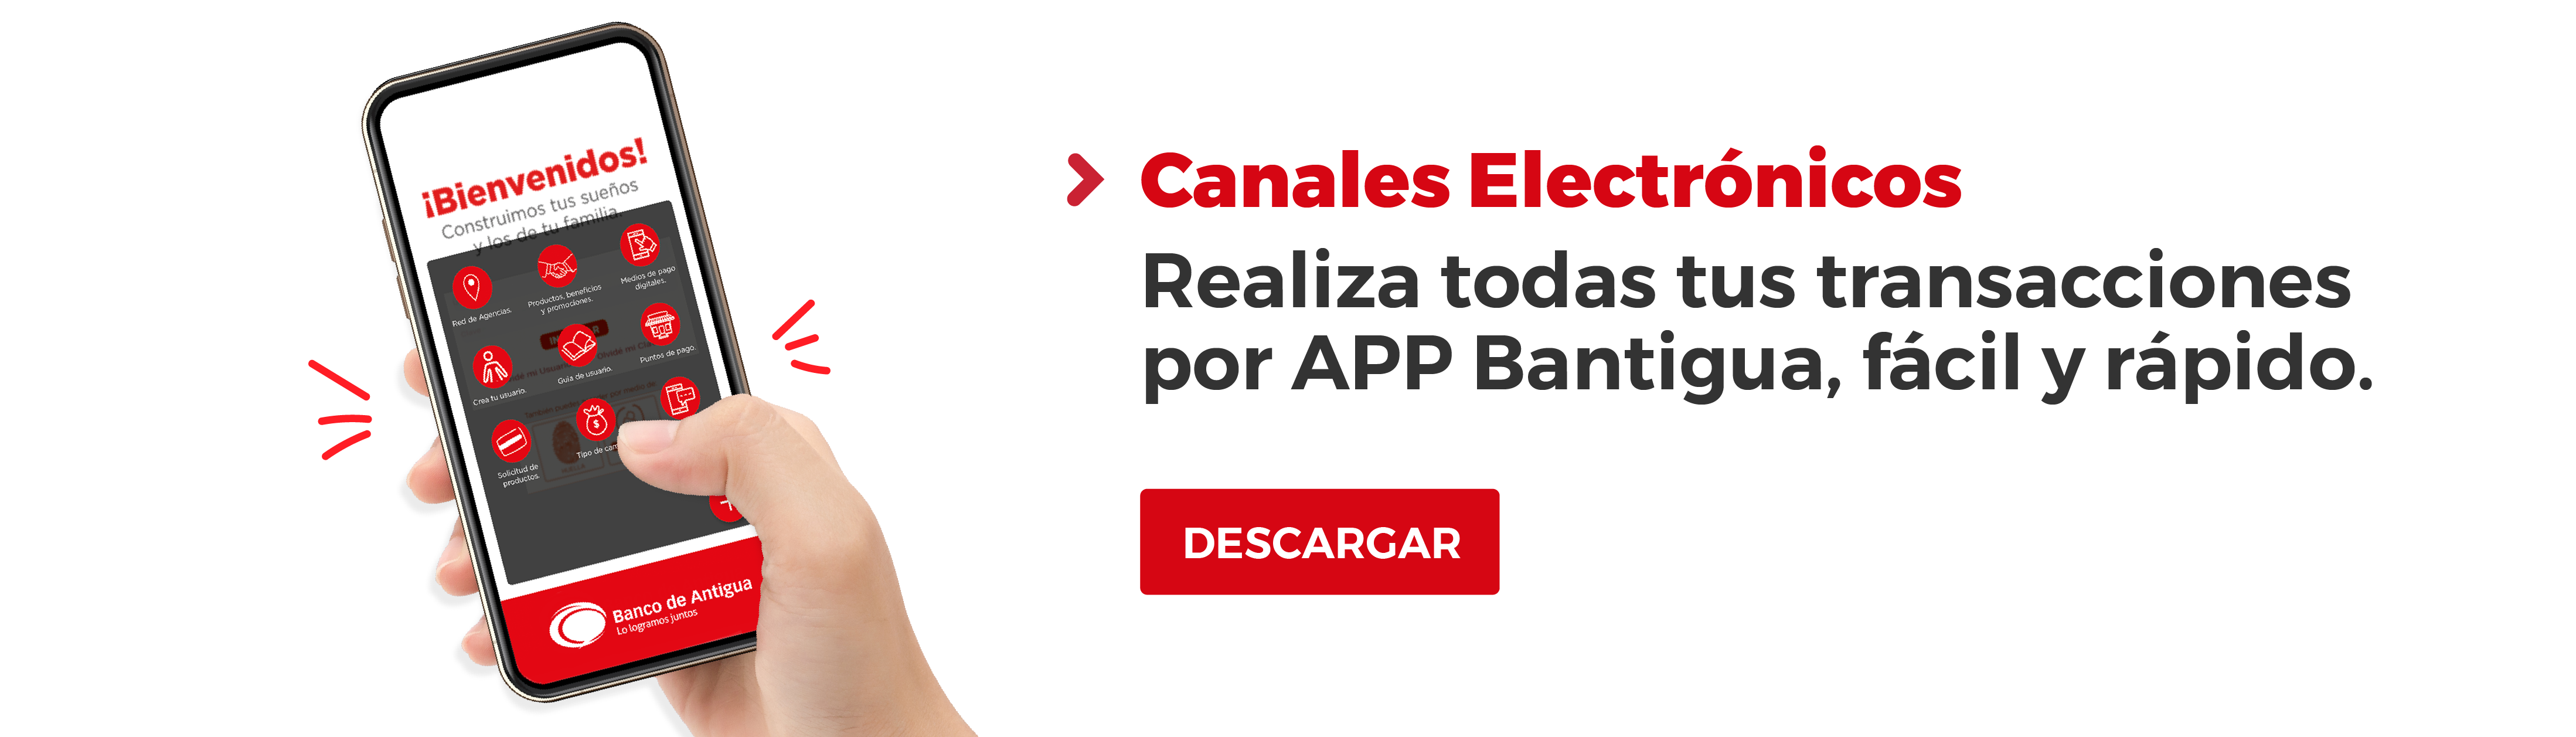 canales electronicos